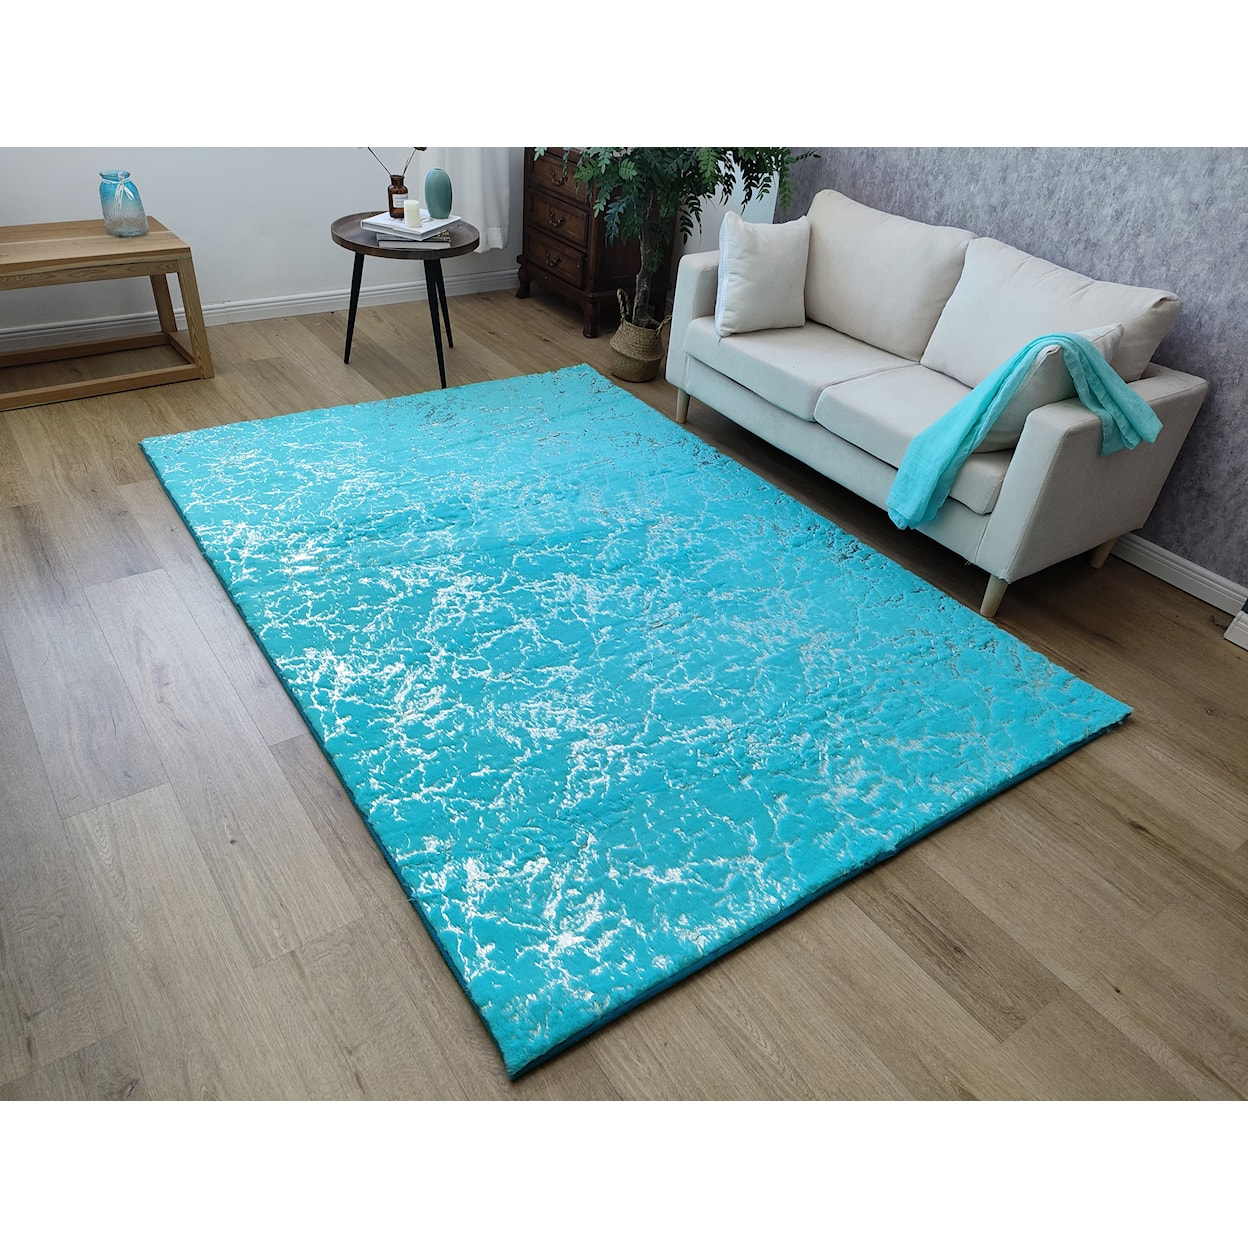 Zinatex Timmy Shaggy S Edition TURQUOISE GOLD 5X8 AREA RUG |